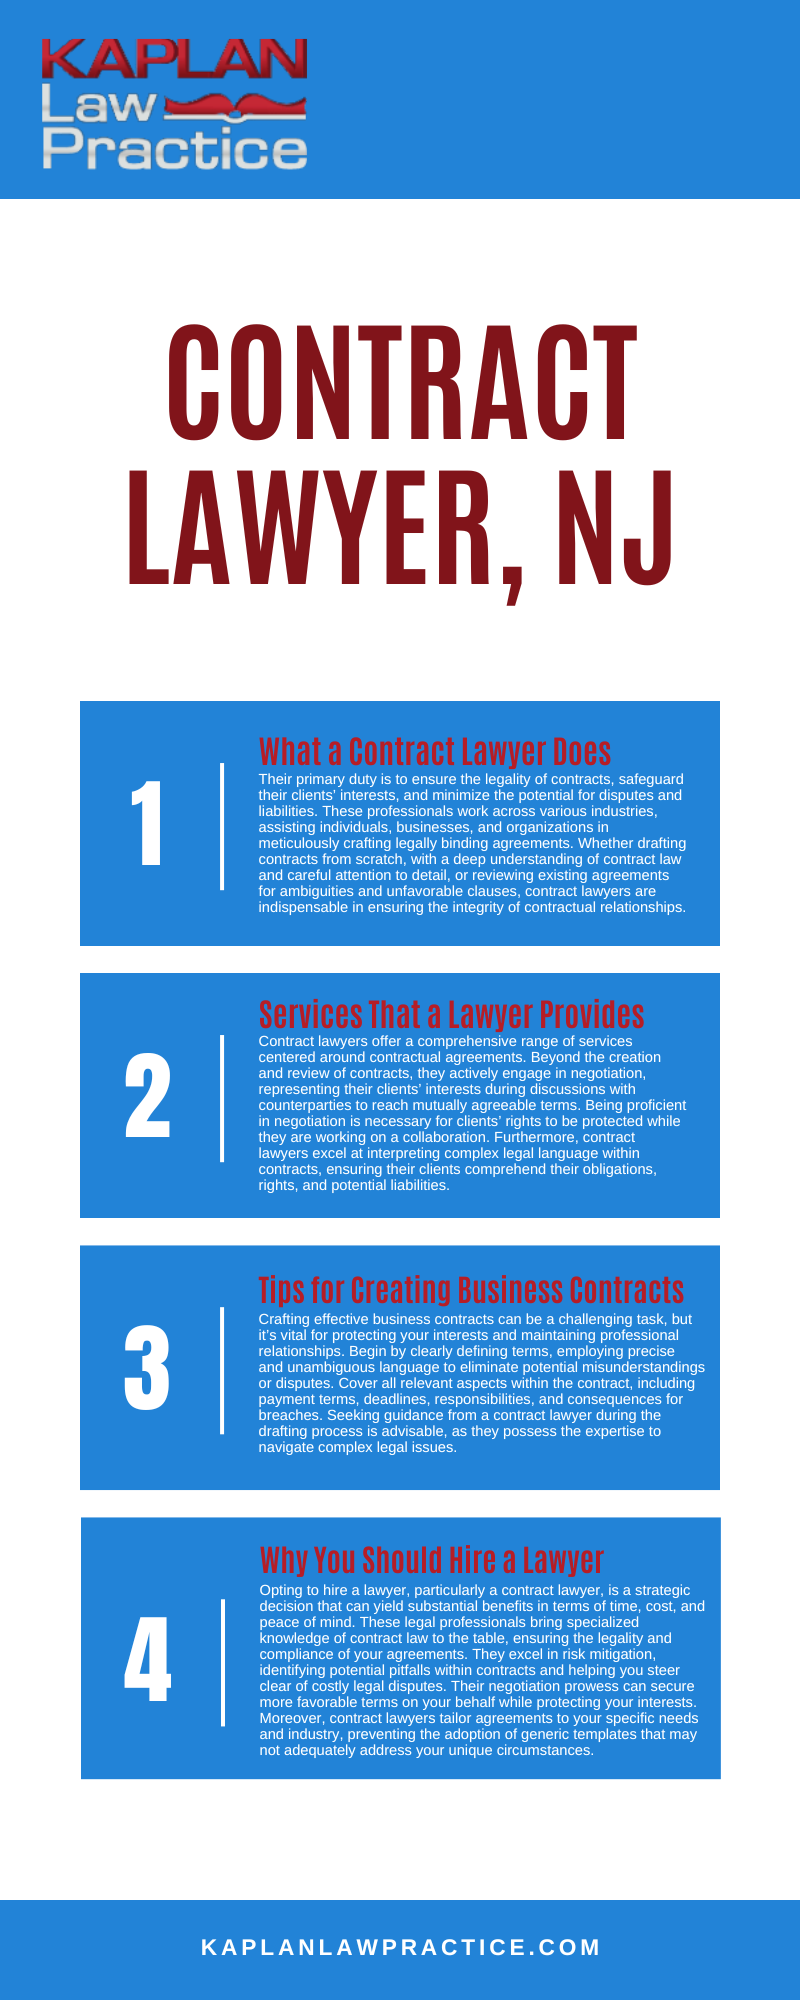 Contract Lawyer, NJ Infographic